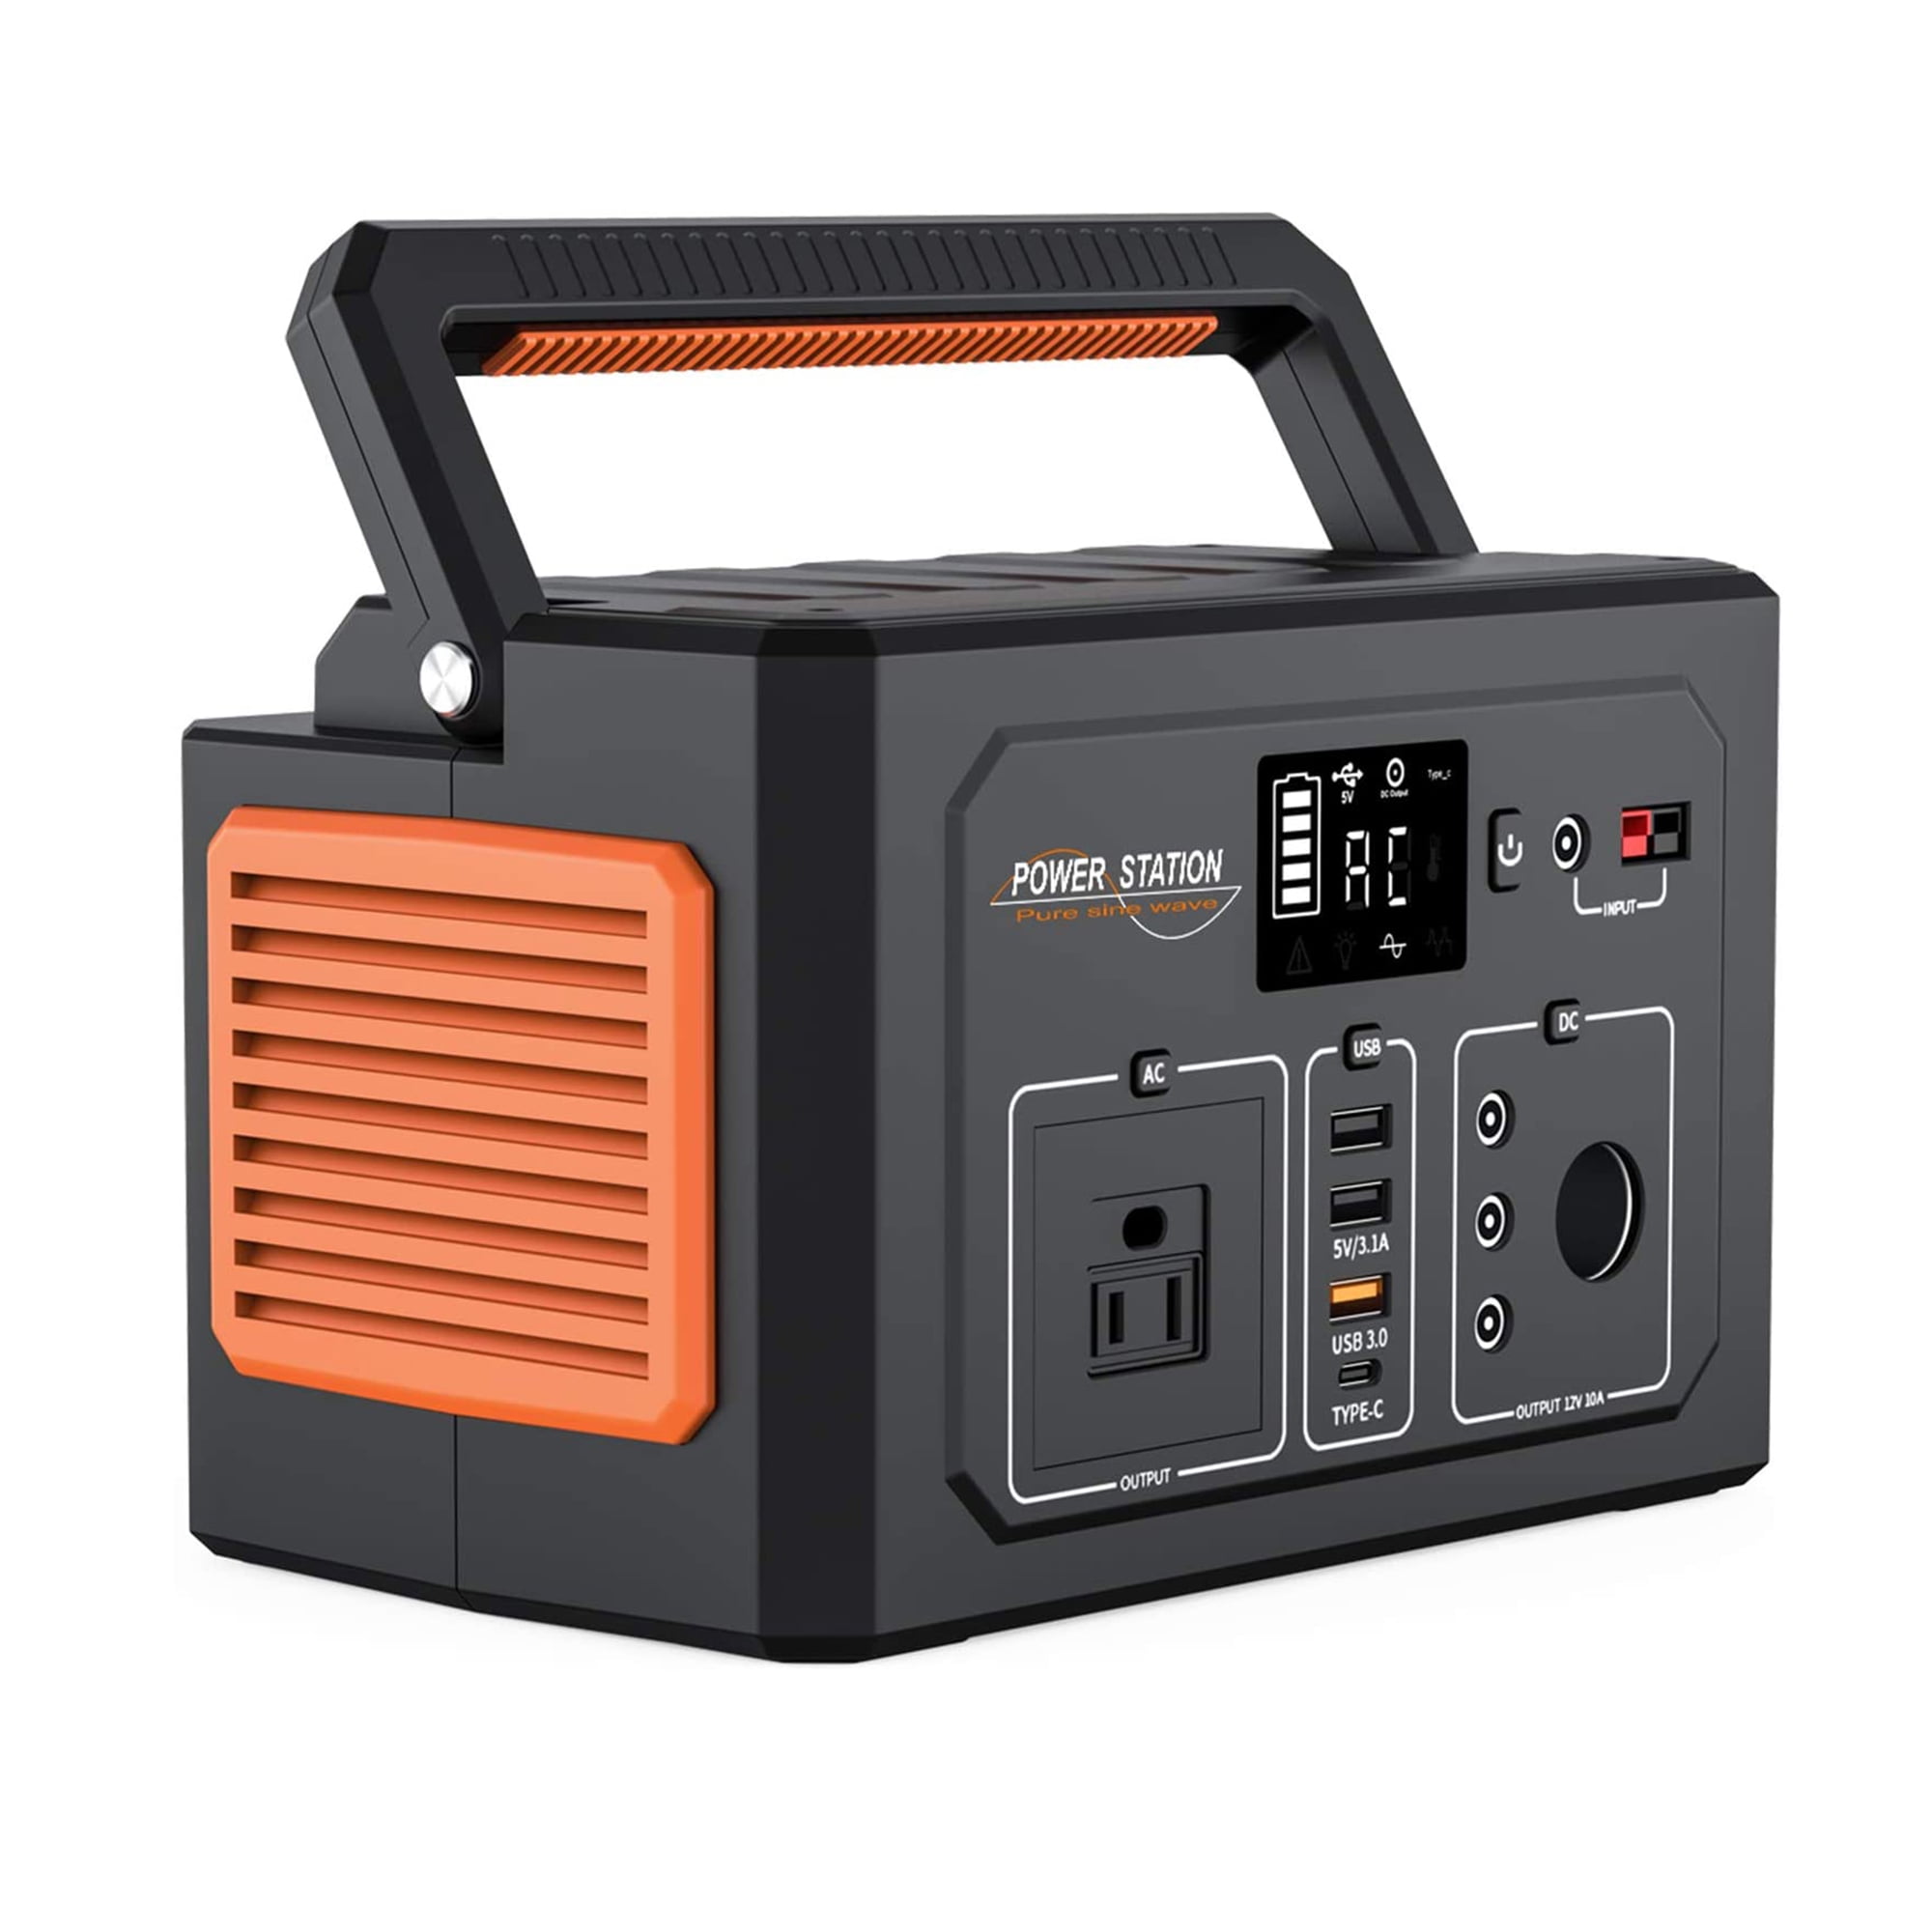 Portable Generator Power Station 500,110V/520Wh 3 Charging ways & 9  Outlets,LED Display & Flashlight,Mobile Solar Generator (Solar Panel  Optional),for CAPA Outdoors Camping Travel Emergency 